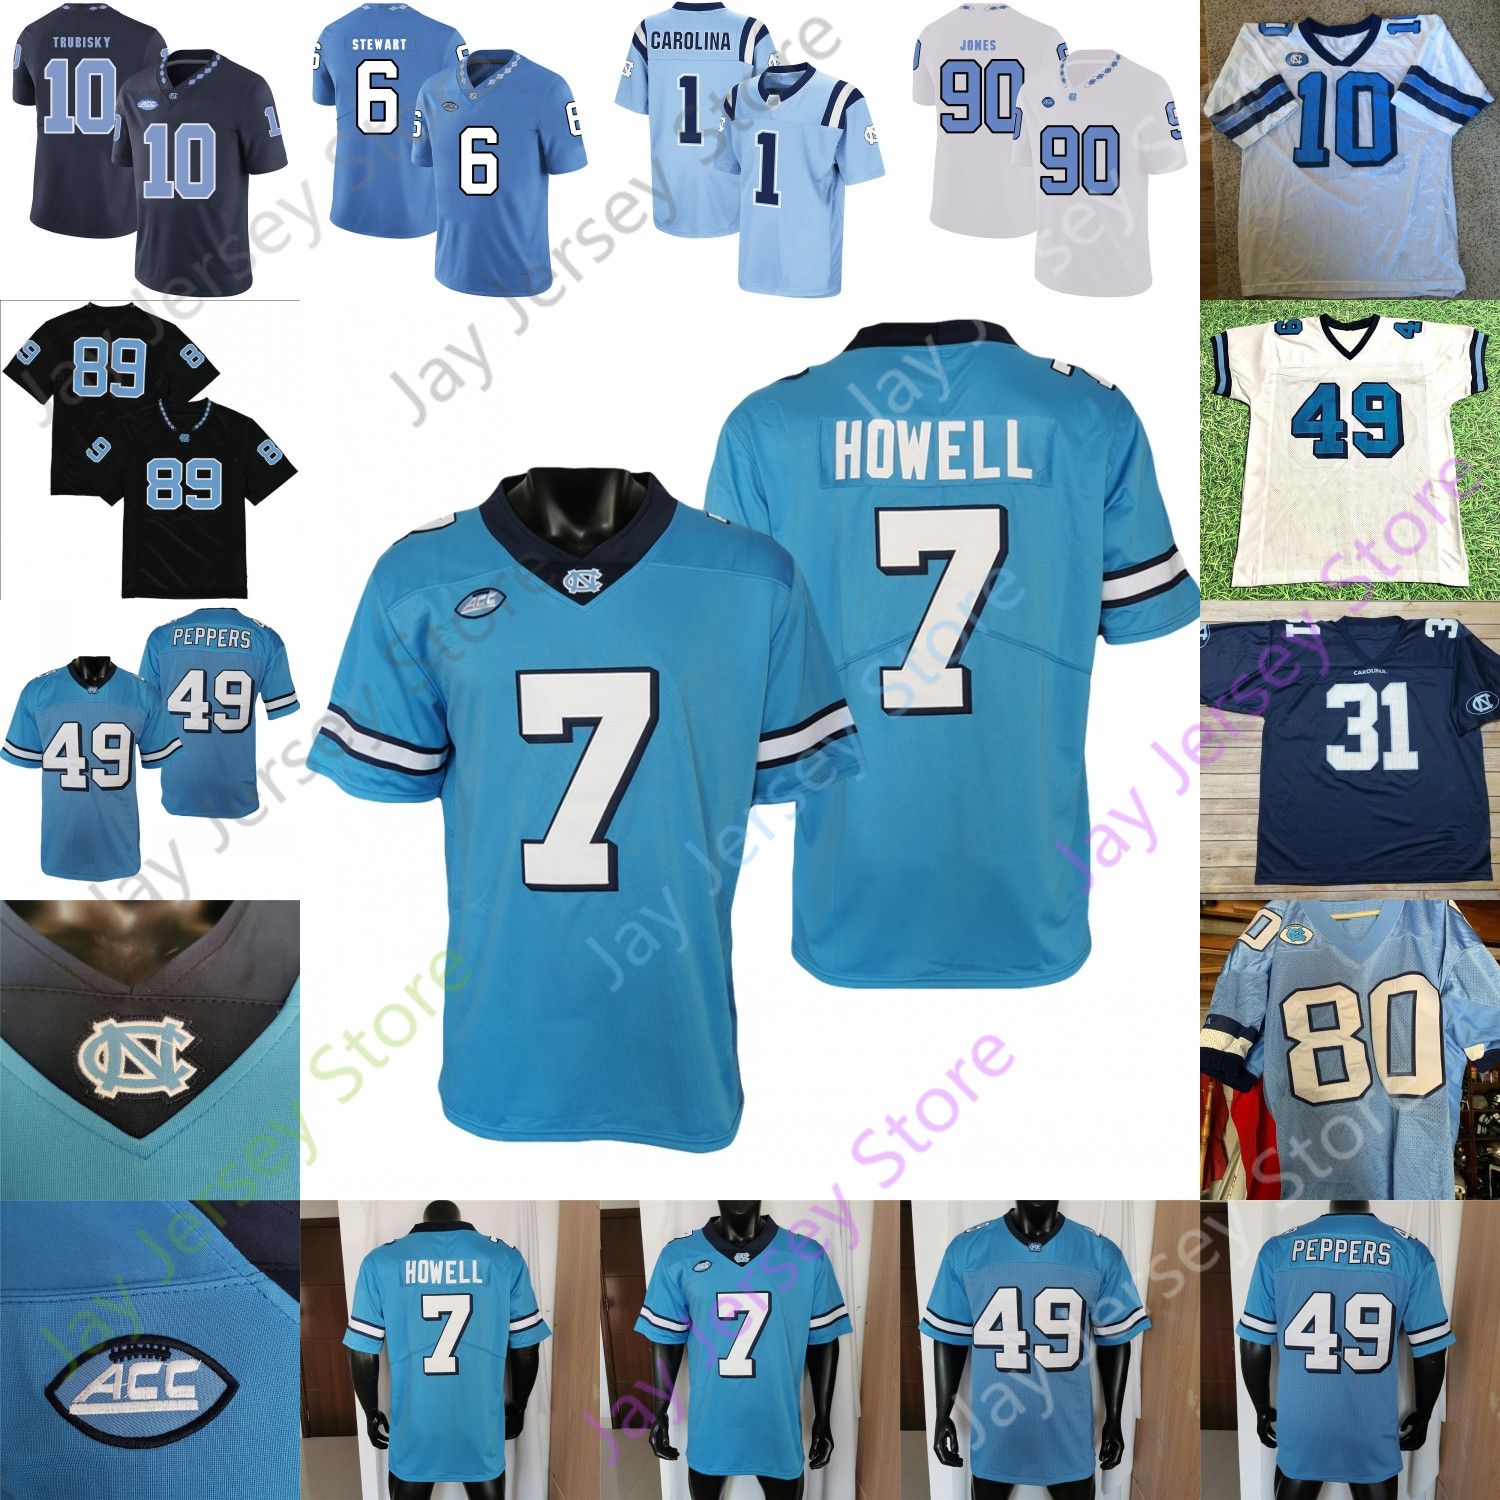 lawrence taylor unc jersey